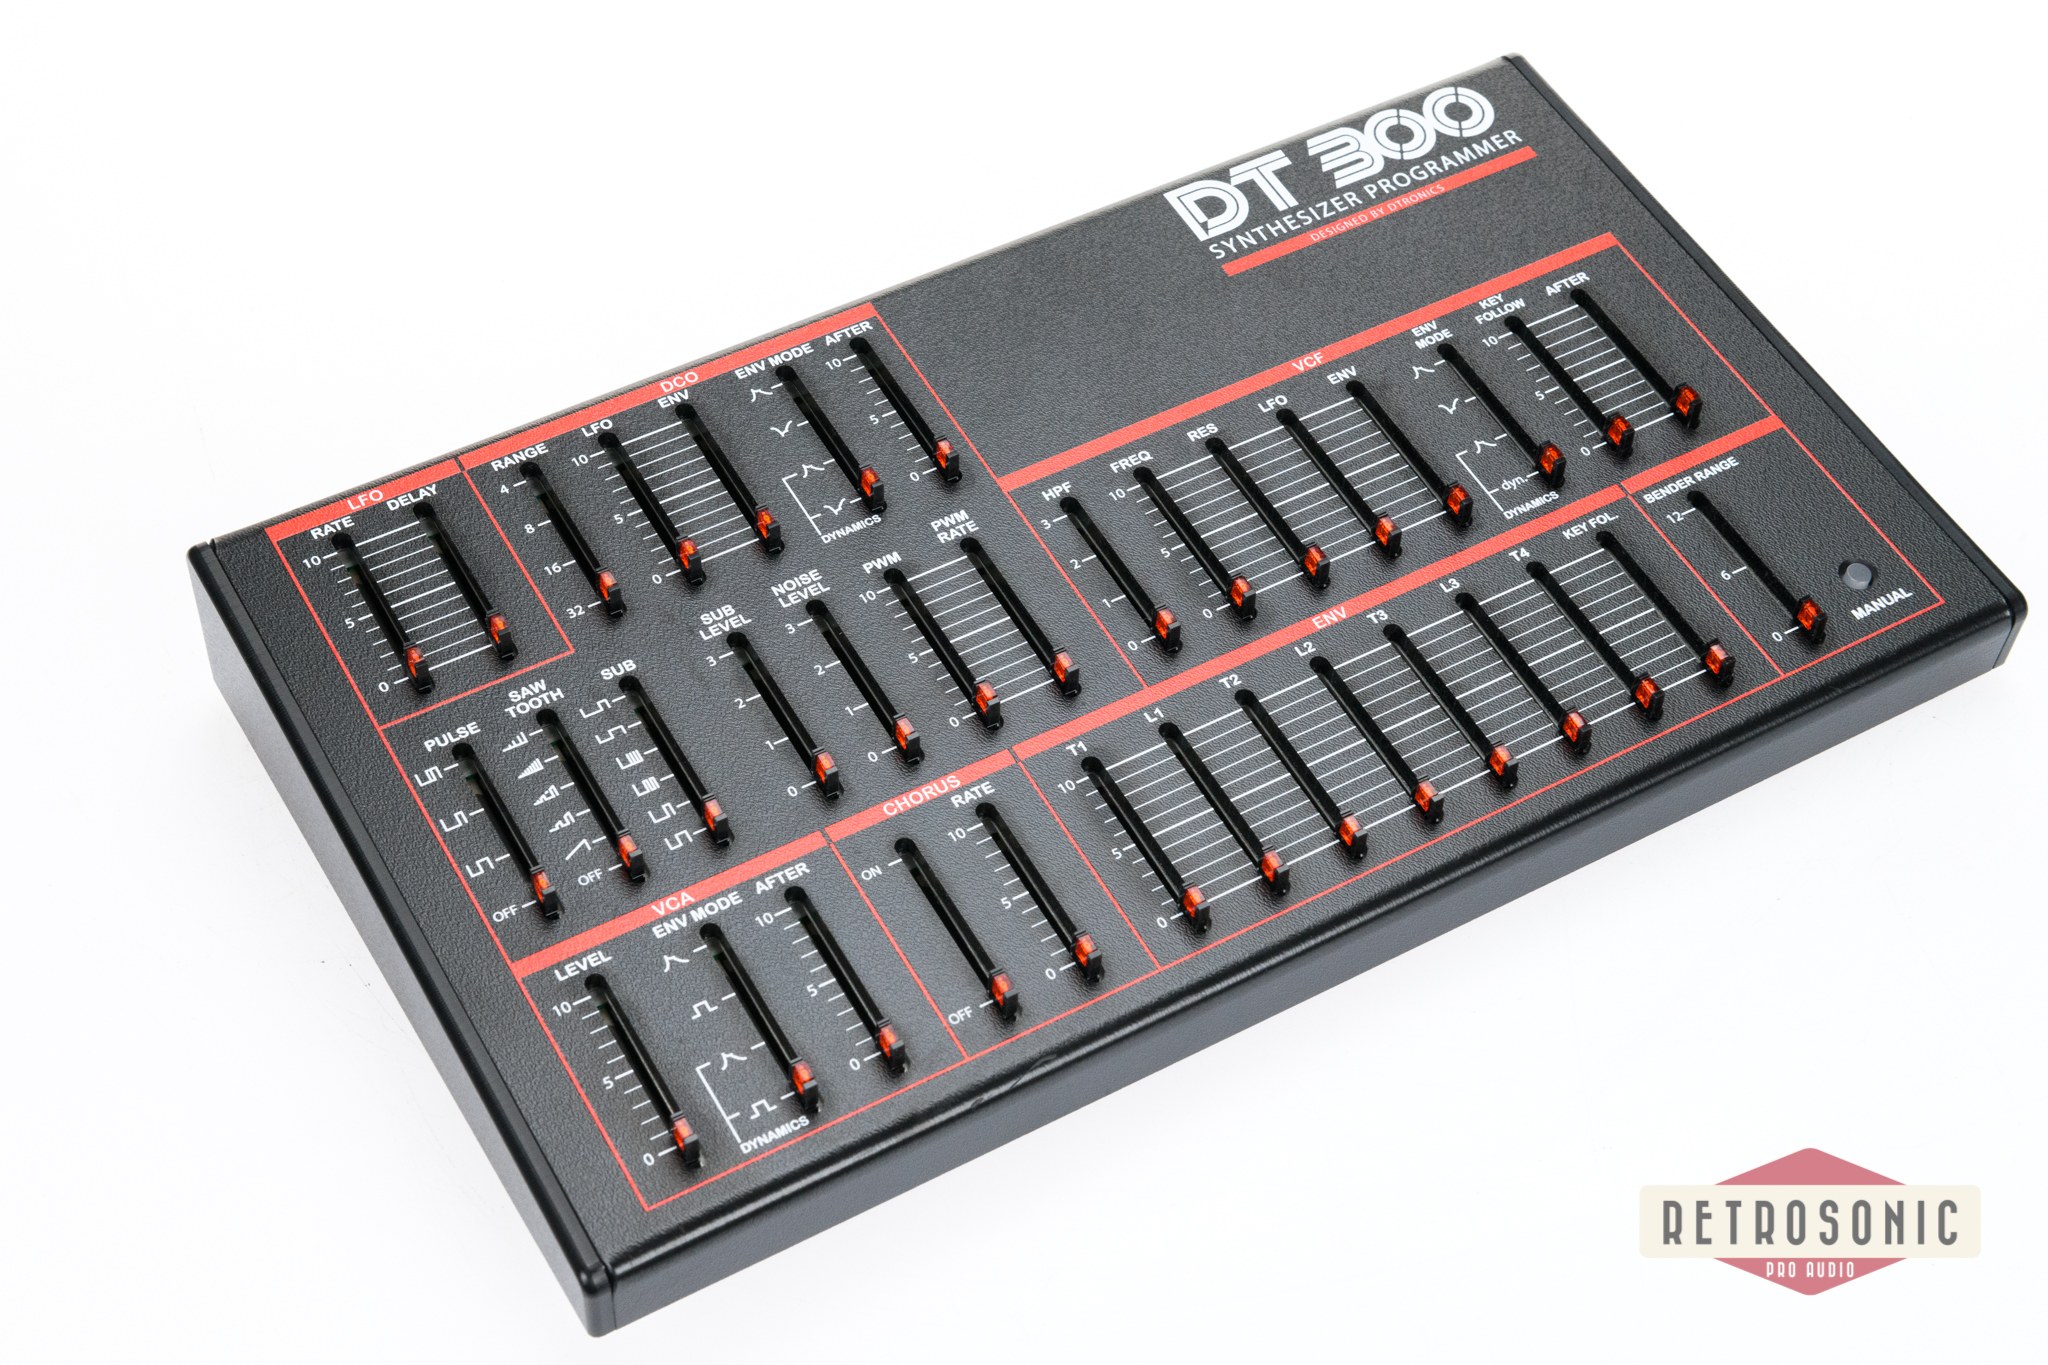 Dtronics DT-300 Controller for Alpha Juno 1, 2 and MKS-50 synthesizers